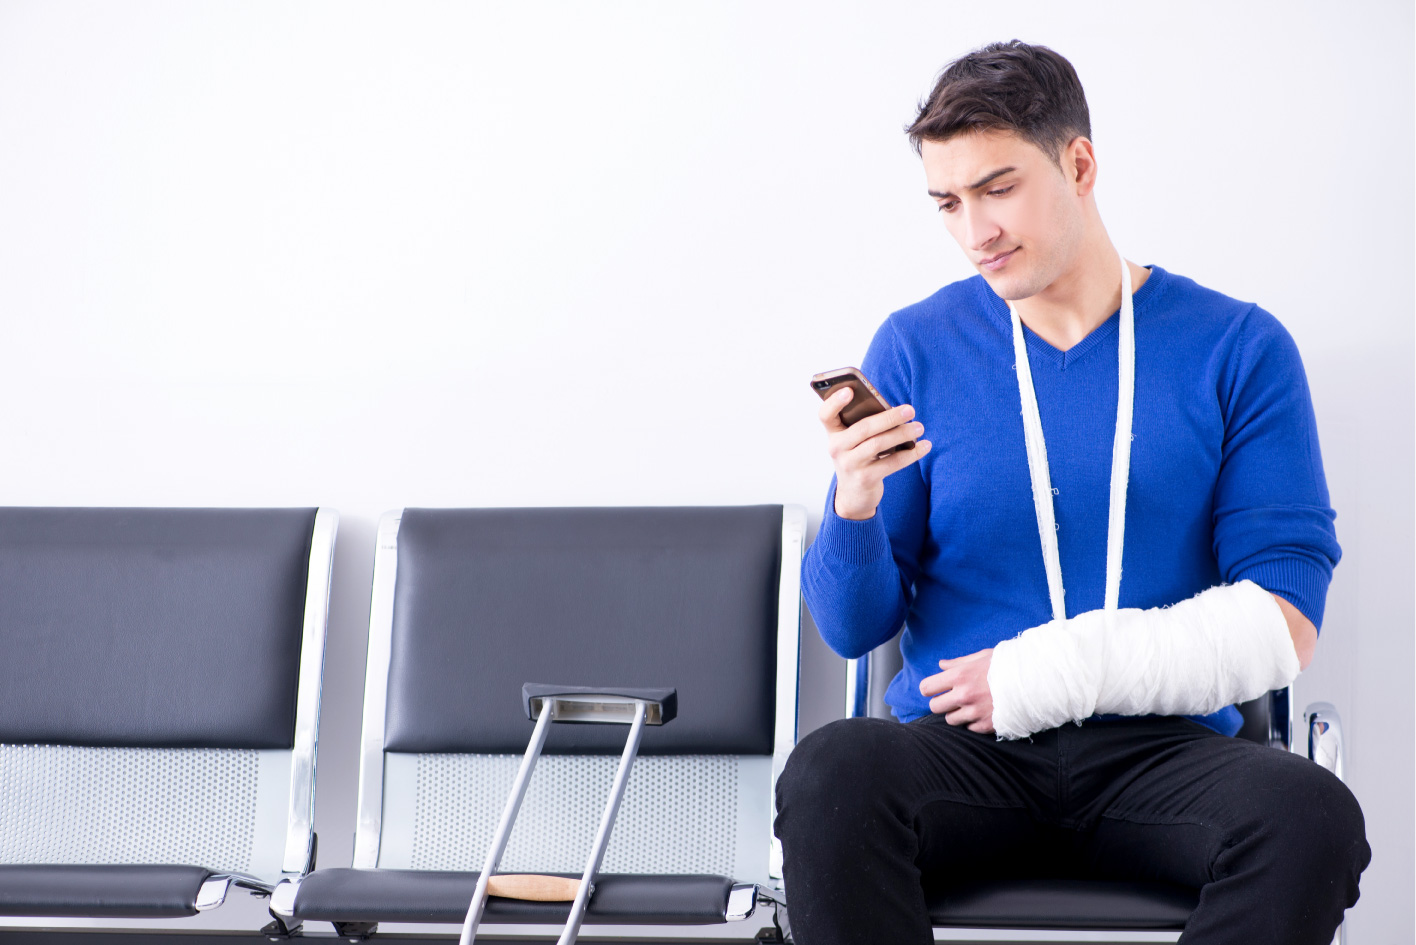 Implementing a Patient Texting Program at Your ASC